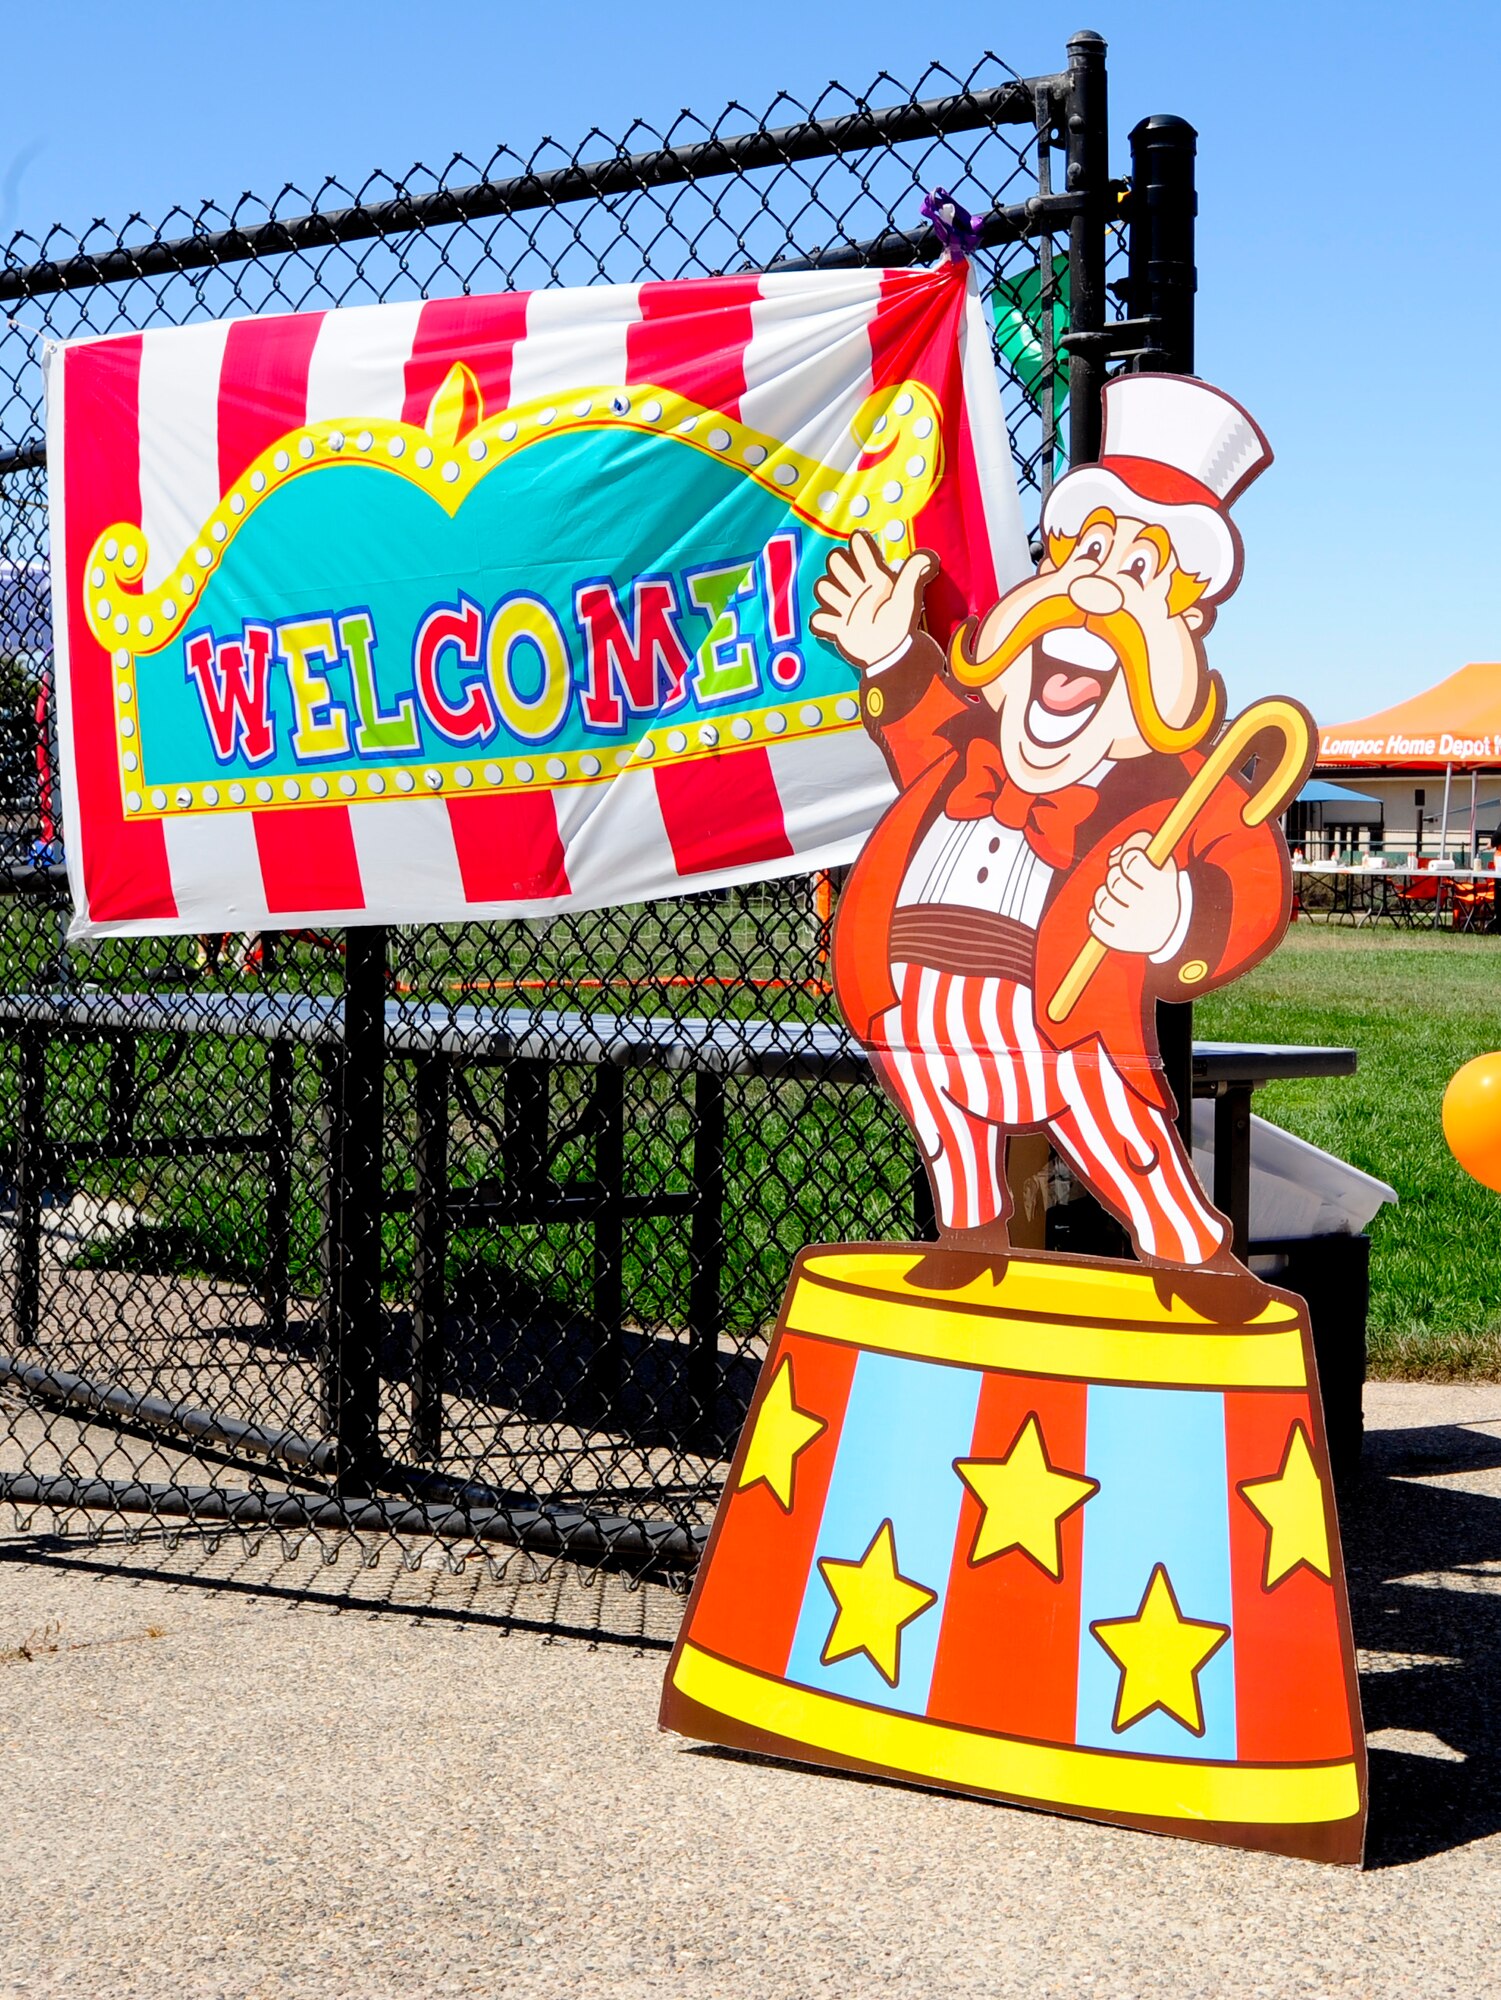 VANDENBERG AIR FORCE BASE, Calif. – A circus themed welcome sign is set up for the 4th annual Salute to Youth event here Thursday, August 15, 2013. Salute to Youth was both an educational and family friendly event. It hosted the Exceptional Family Member Program, local schools, Backpack Brigade, food, games and prizes. (U.S. Air Force photo/Airman Yvonne Morales)